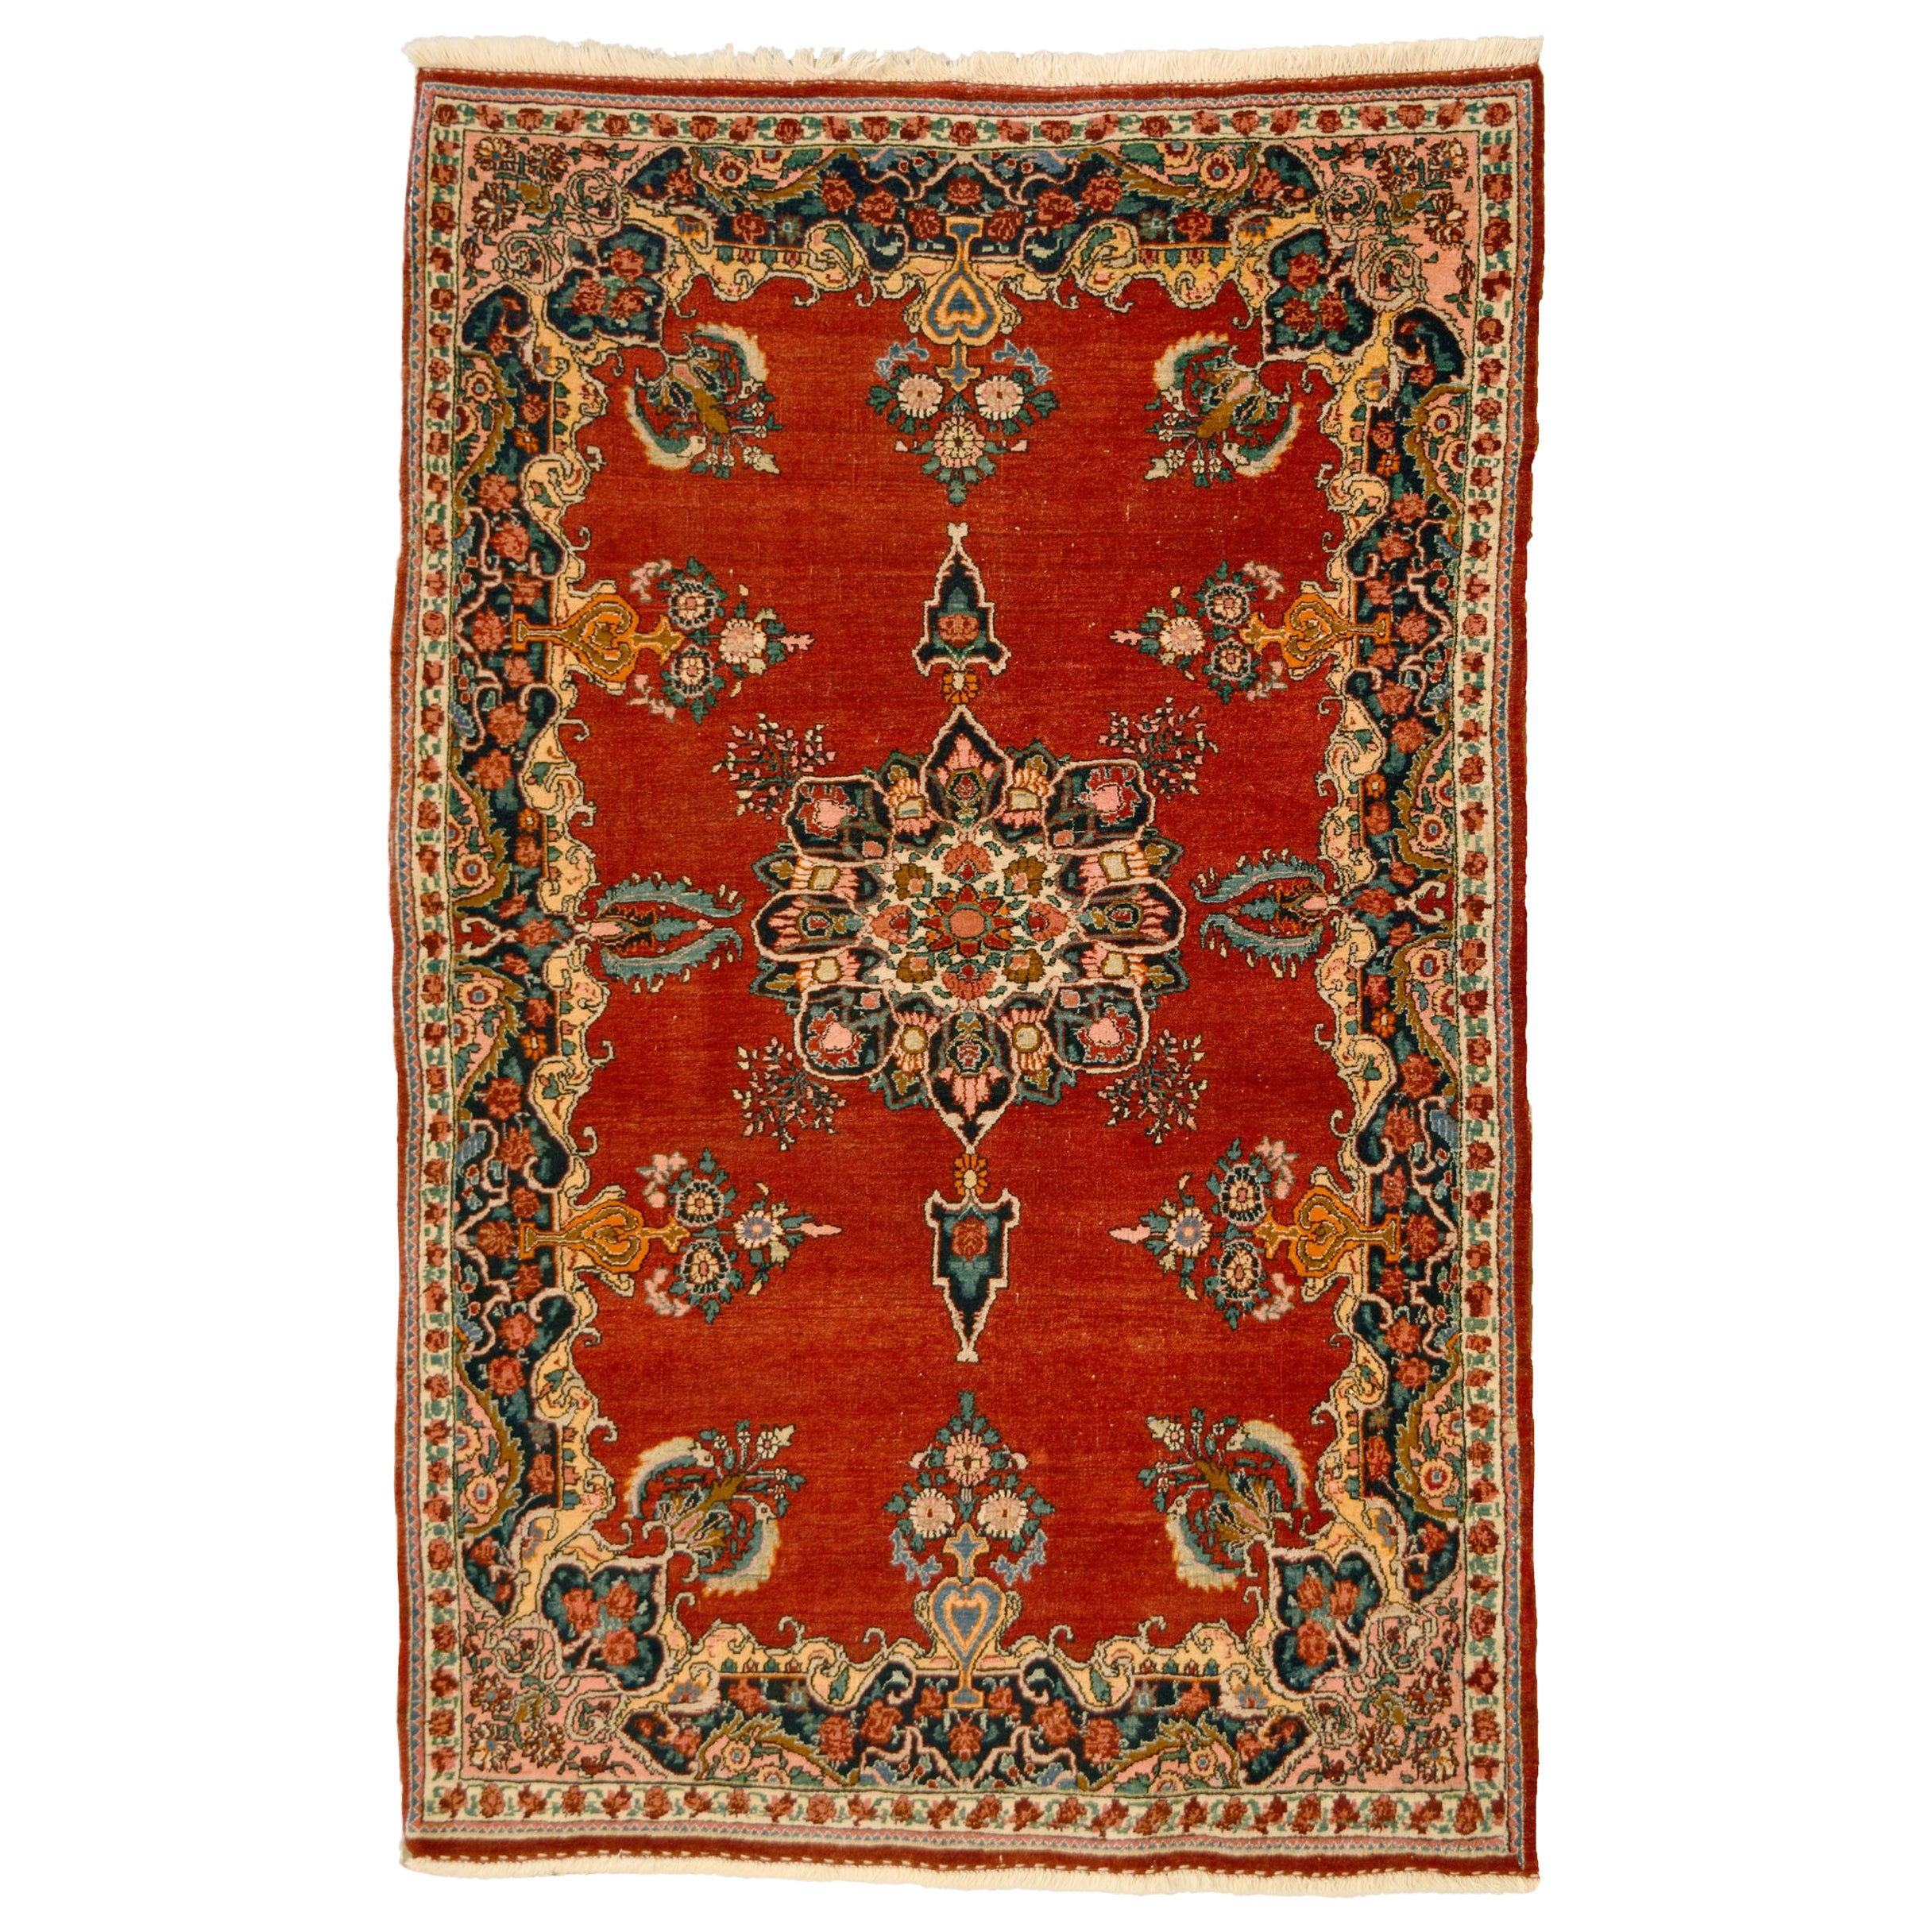 Antique Formal 1900s Persian Bidjar Rug in Red, Blue, and Gold, 4' x 6' For Sale